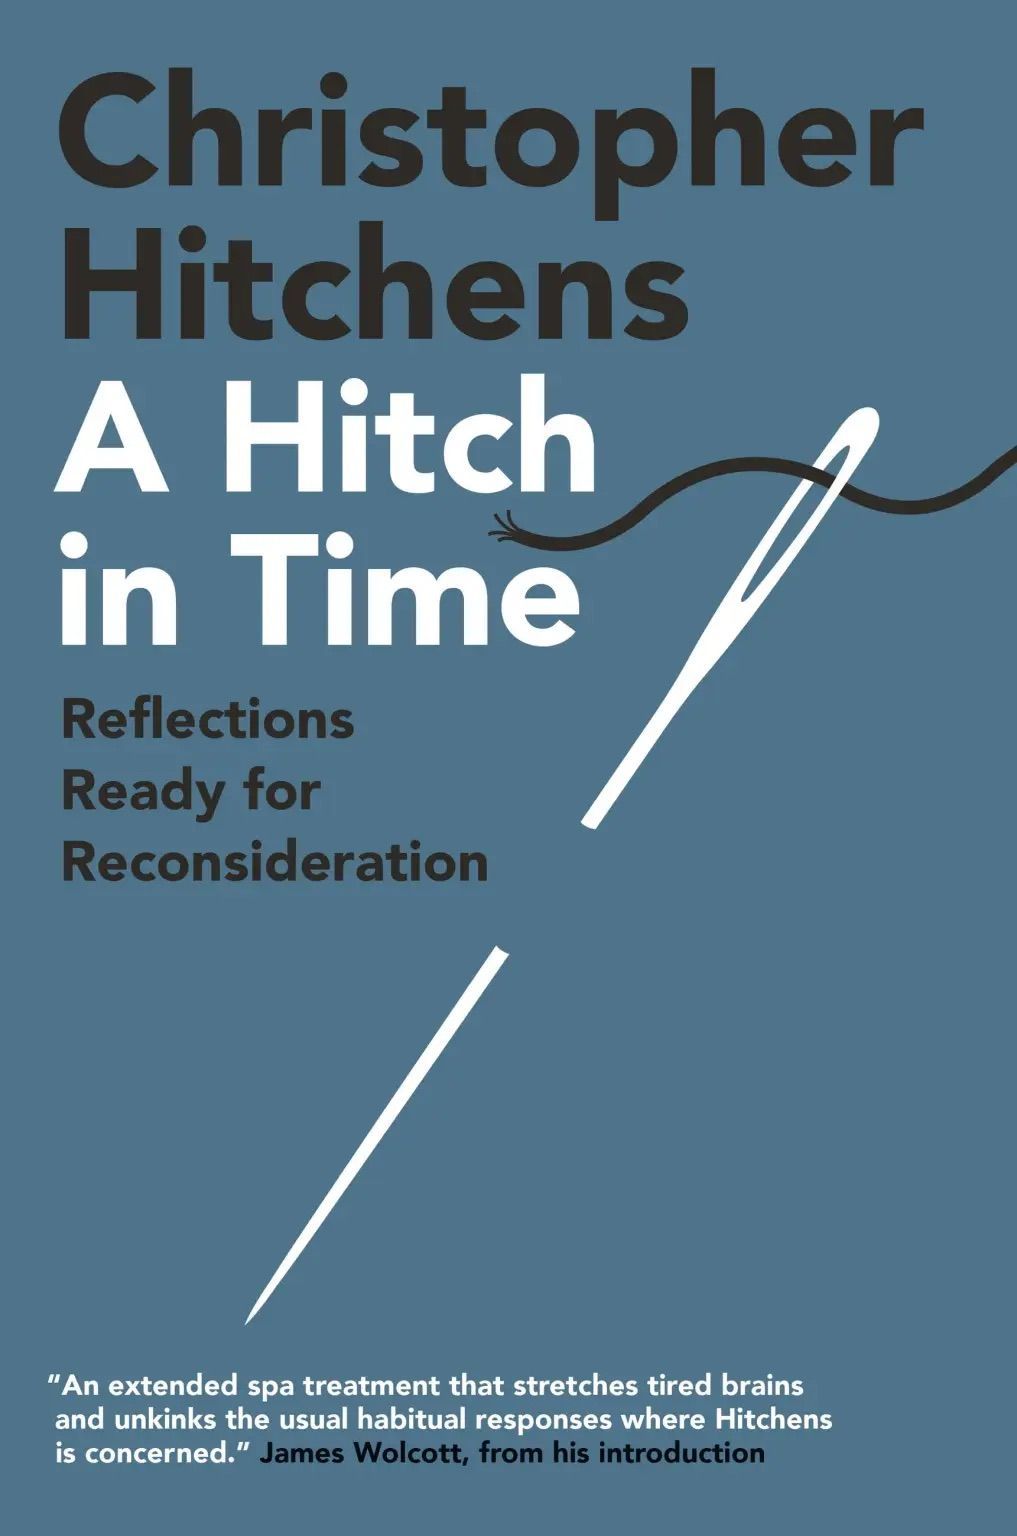 Why Hitch Still Matters: On Christopher Hitchens’s “A Hitch in Time”